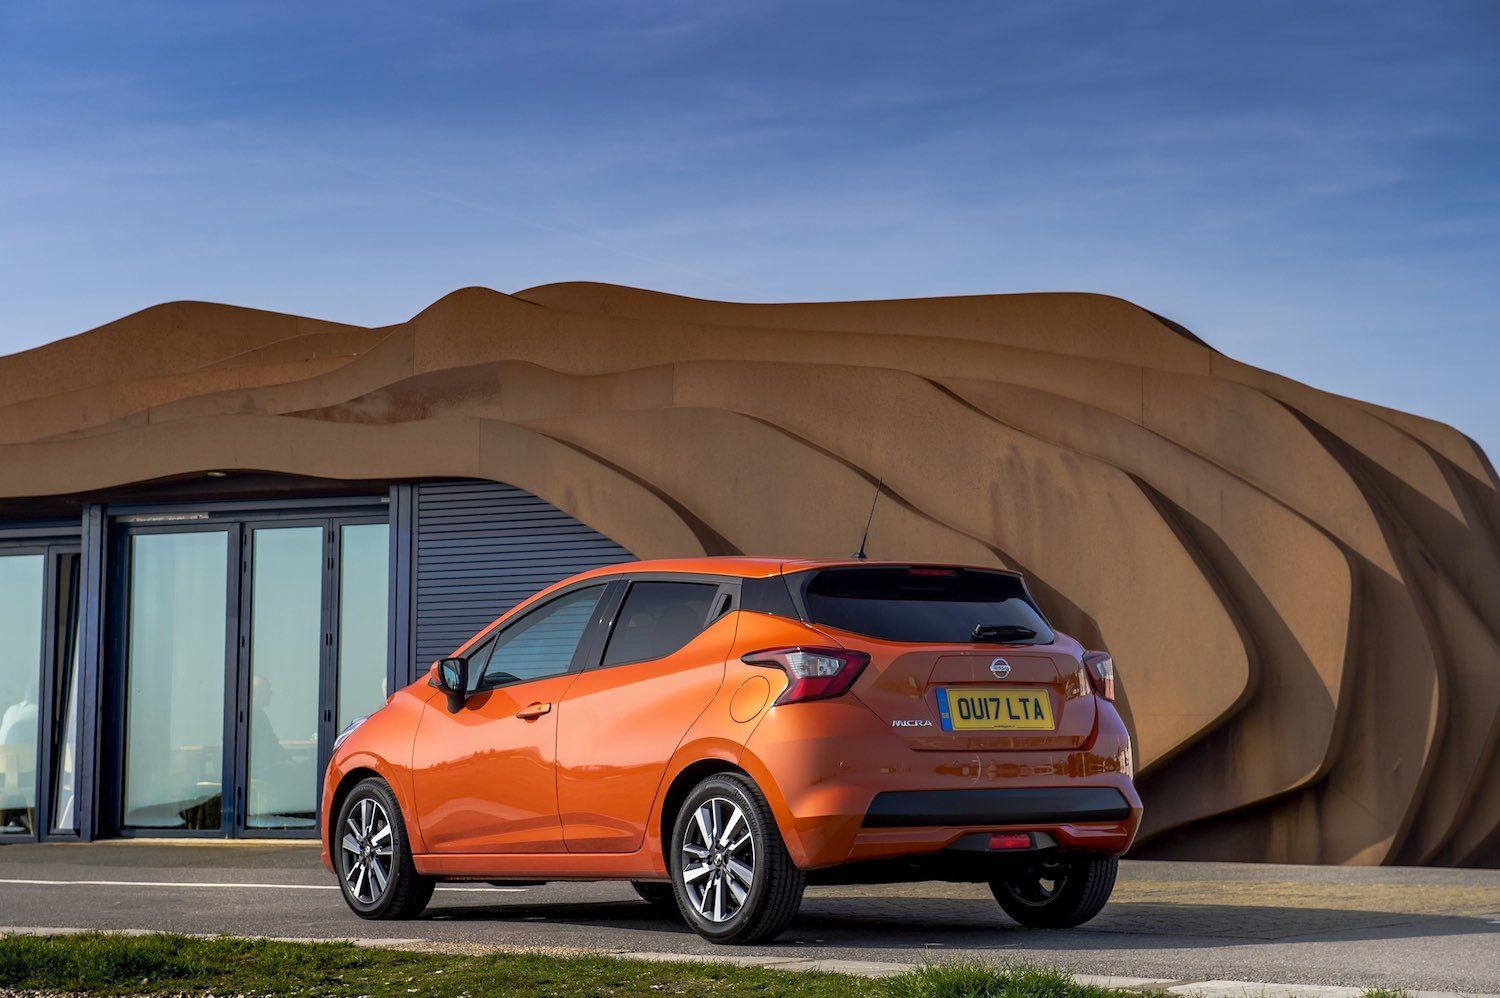 Tom Scanlan drives the All New Nissan Micra 3